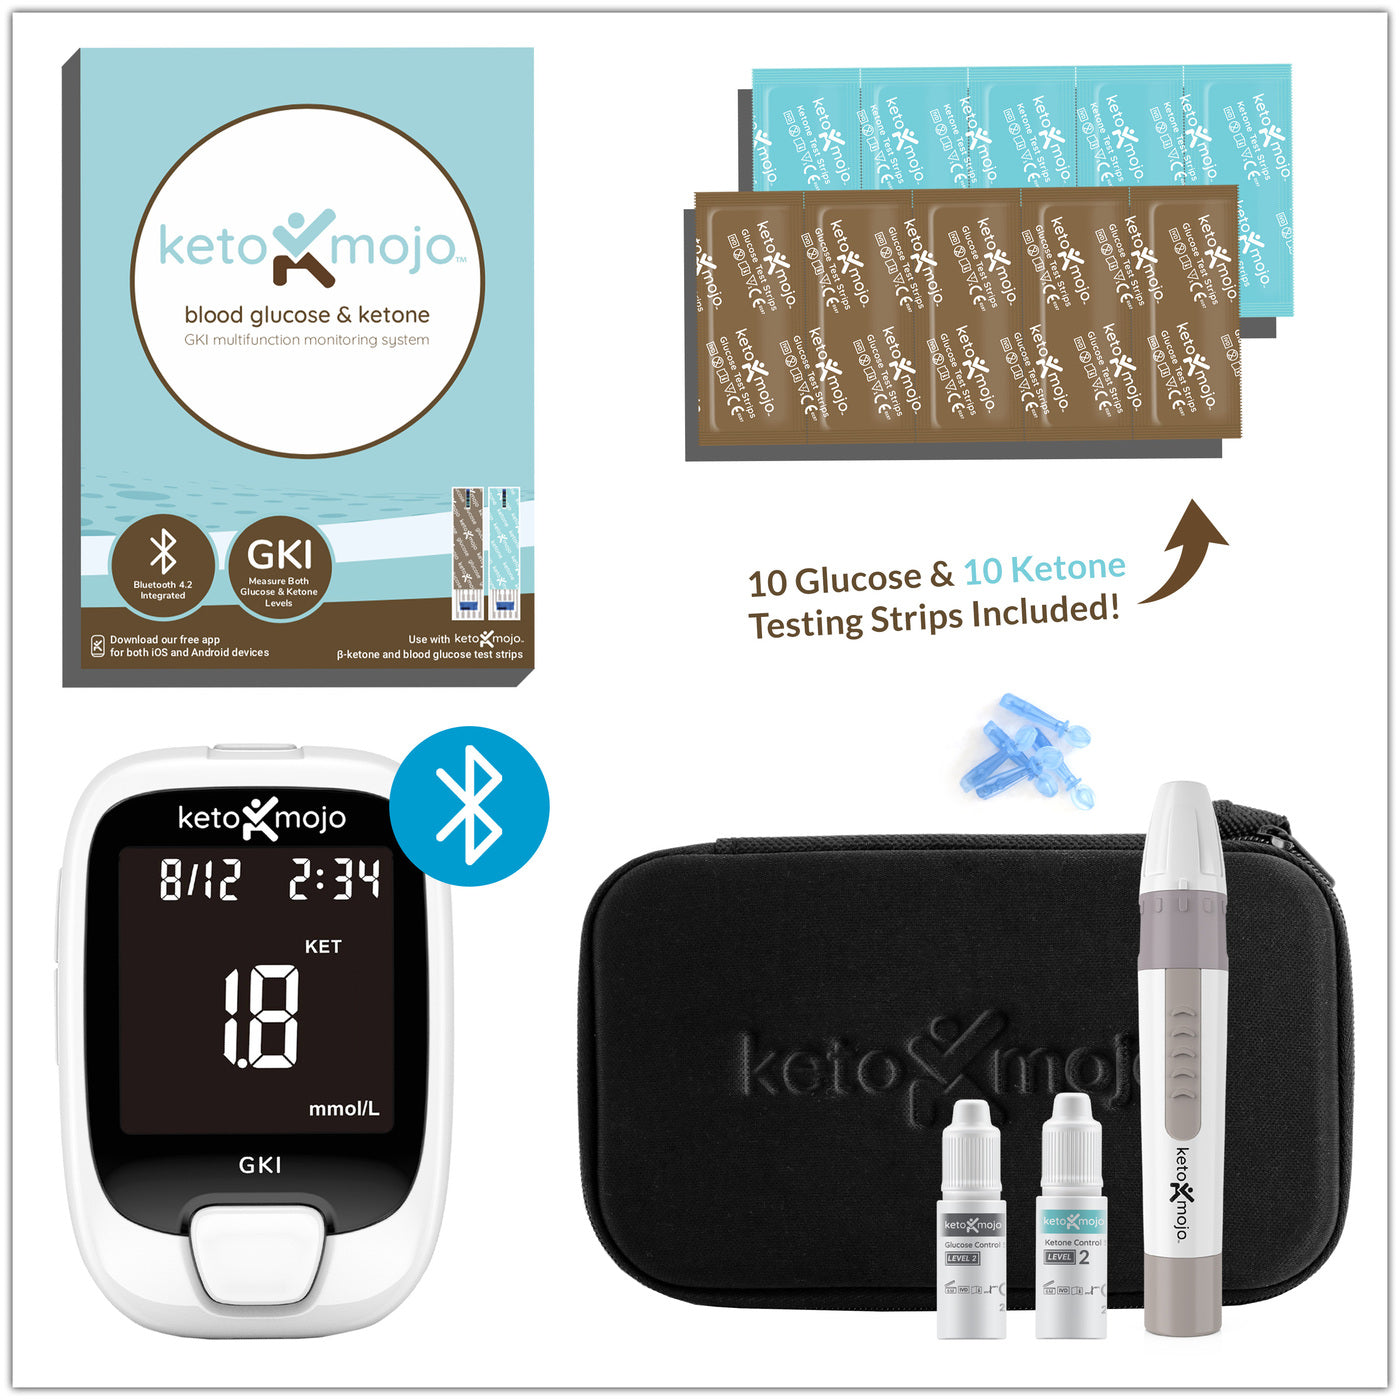 The Keto-Mojo GKI glucose and ketone meter is an essential tool for anyone following a ketogenic lifestyle.  The Keto-Mojo Basic Starter Kit comes with a blood ketone and glucose meter with Bluetooth capabilities. Glucose test strips. Ketone test strips. A lancet device with 10 lancets. Glucose control solution. Ketone control solution. A high-quality accessory case.